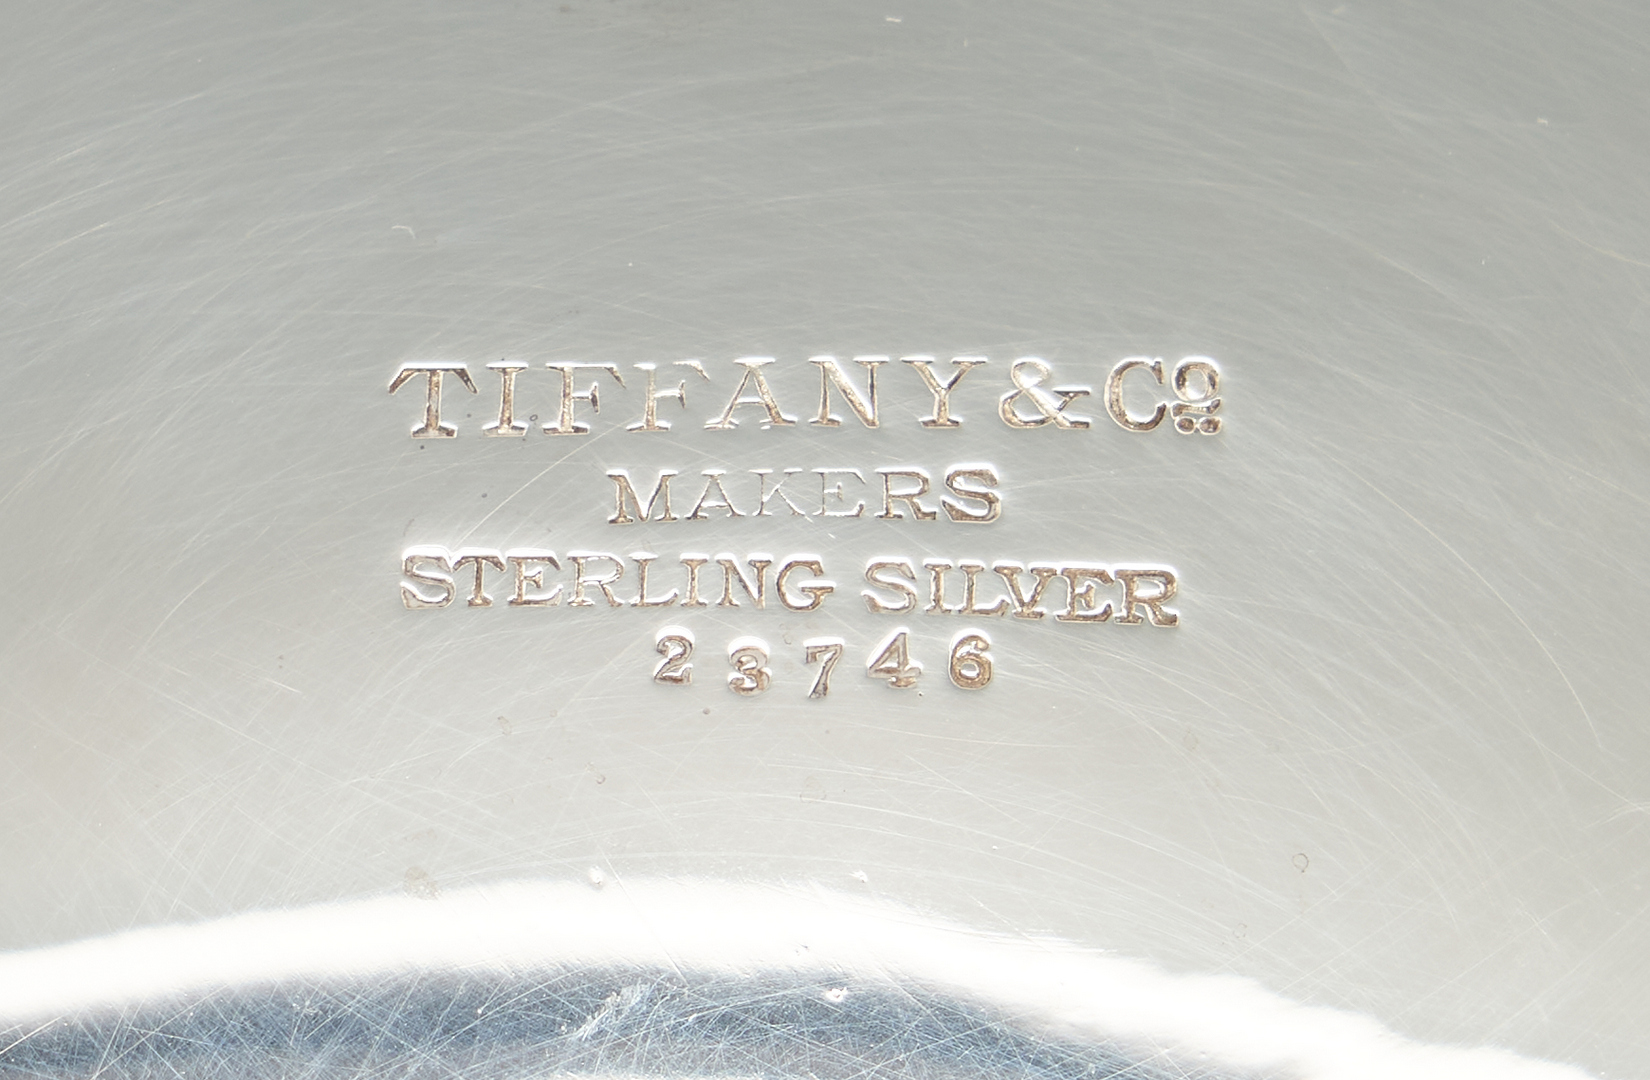 Lot 77: Tiffany Sterling Silver Punch Bowl, 13 1/2" dia